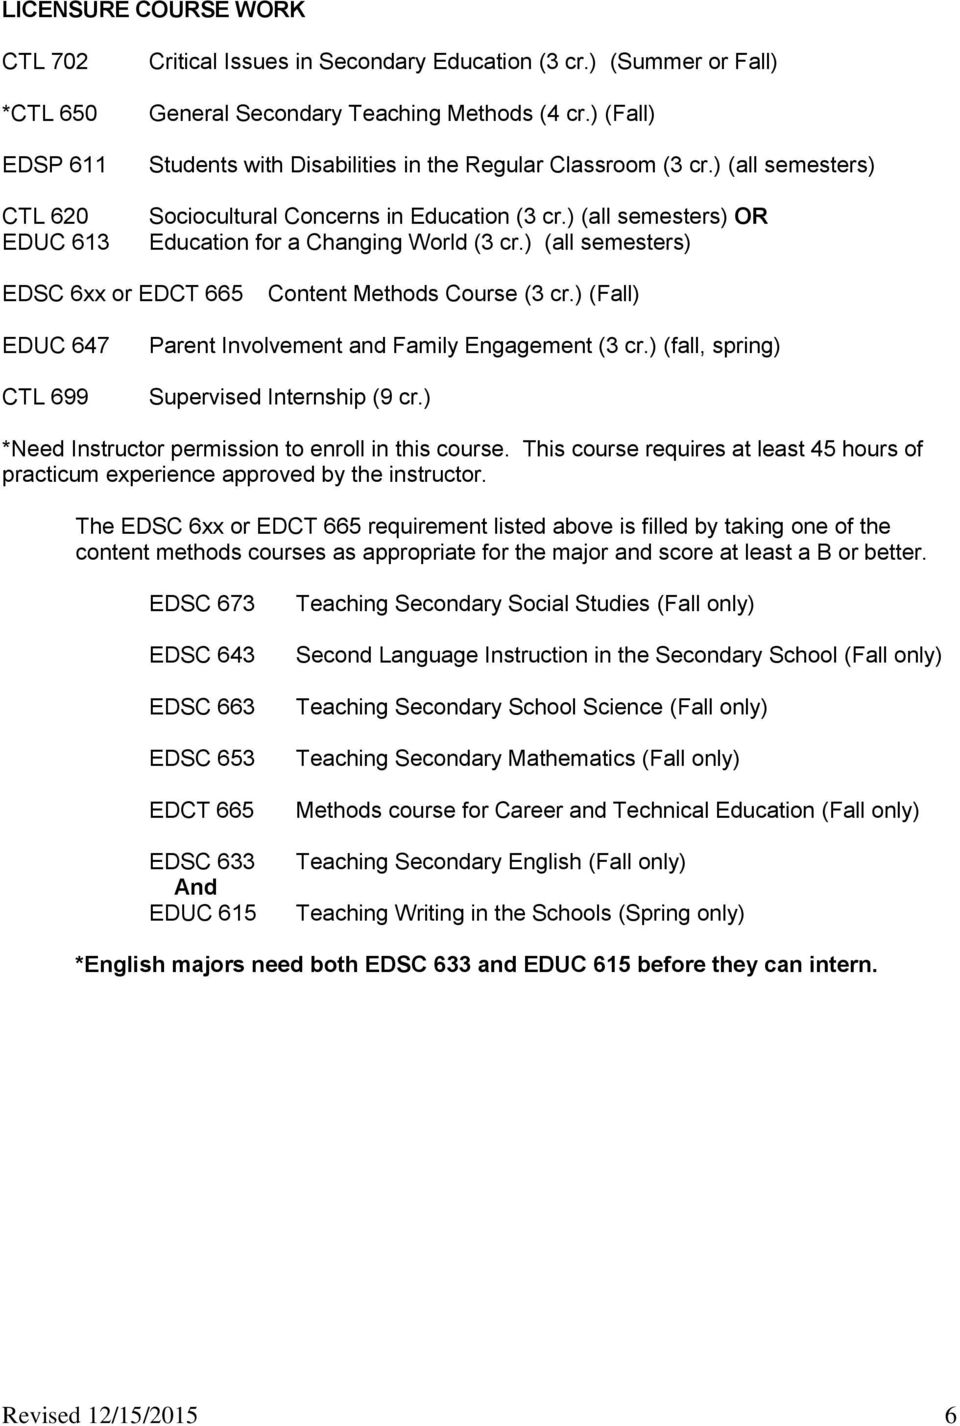 ) (all semesters) EDSC 6xx or EDCT 665 Content Methods Course (3 cr.) (Fall) EDUC 647 CTL 699 Parent Involvement and Family Engagement (3 cr.) (fall, spring) Supervised Internship (9 cr.